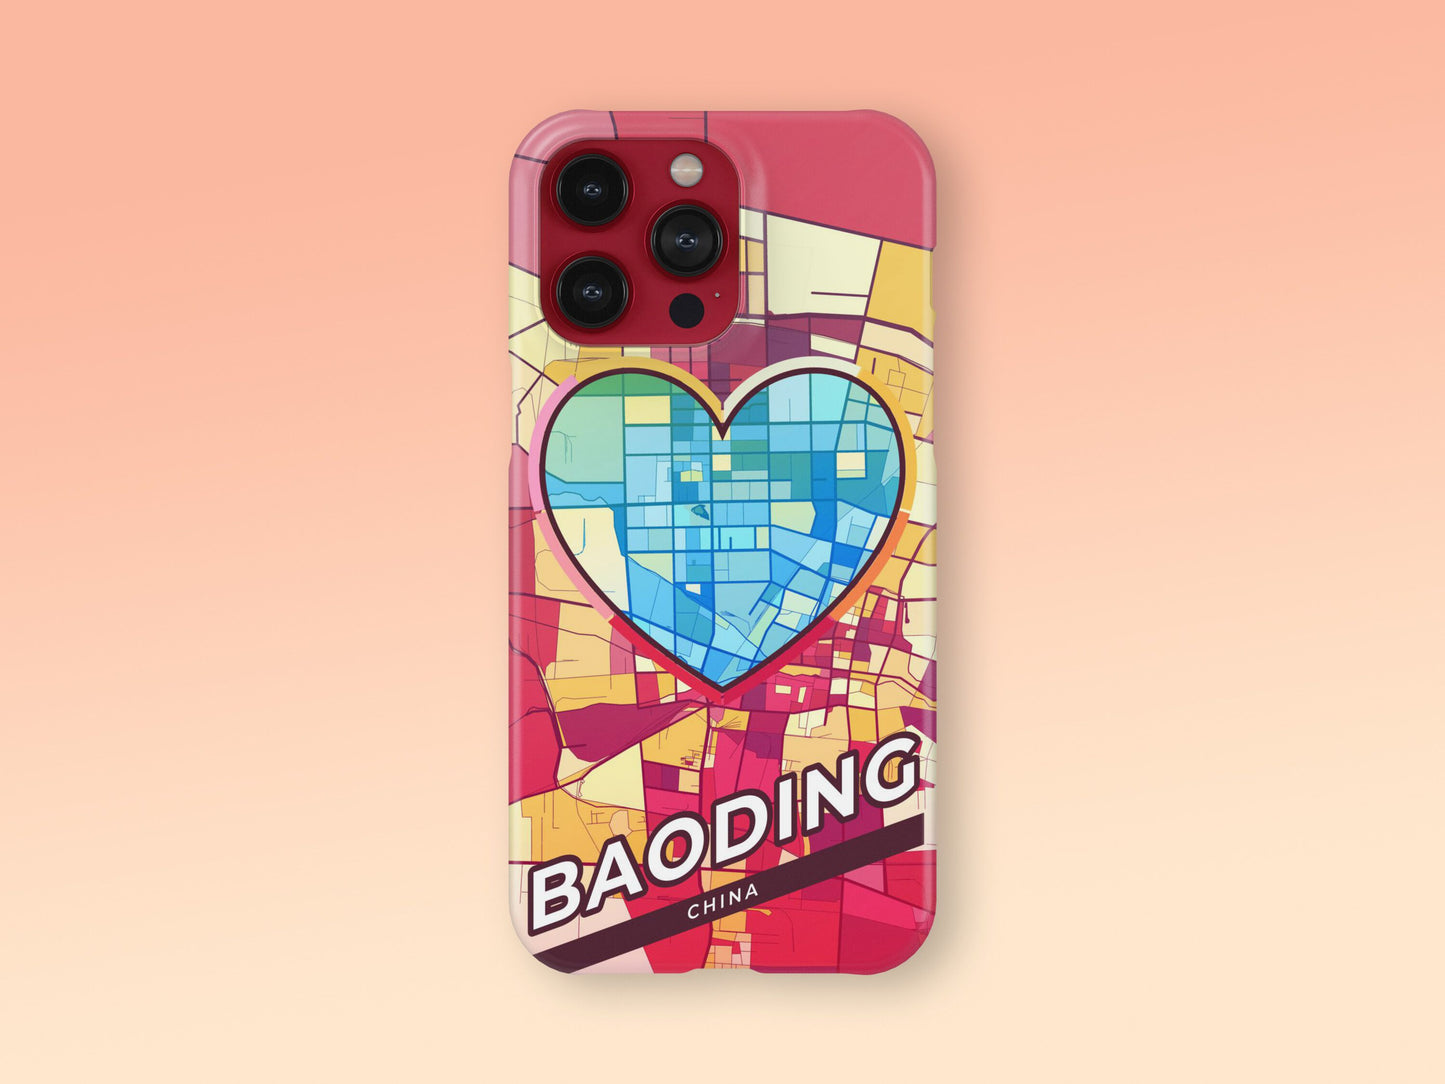 Baoding China slim phone case with colorful icon. Birthday, wedding or housewarming gift. Couple match cases. 2